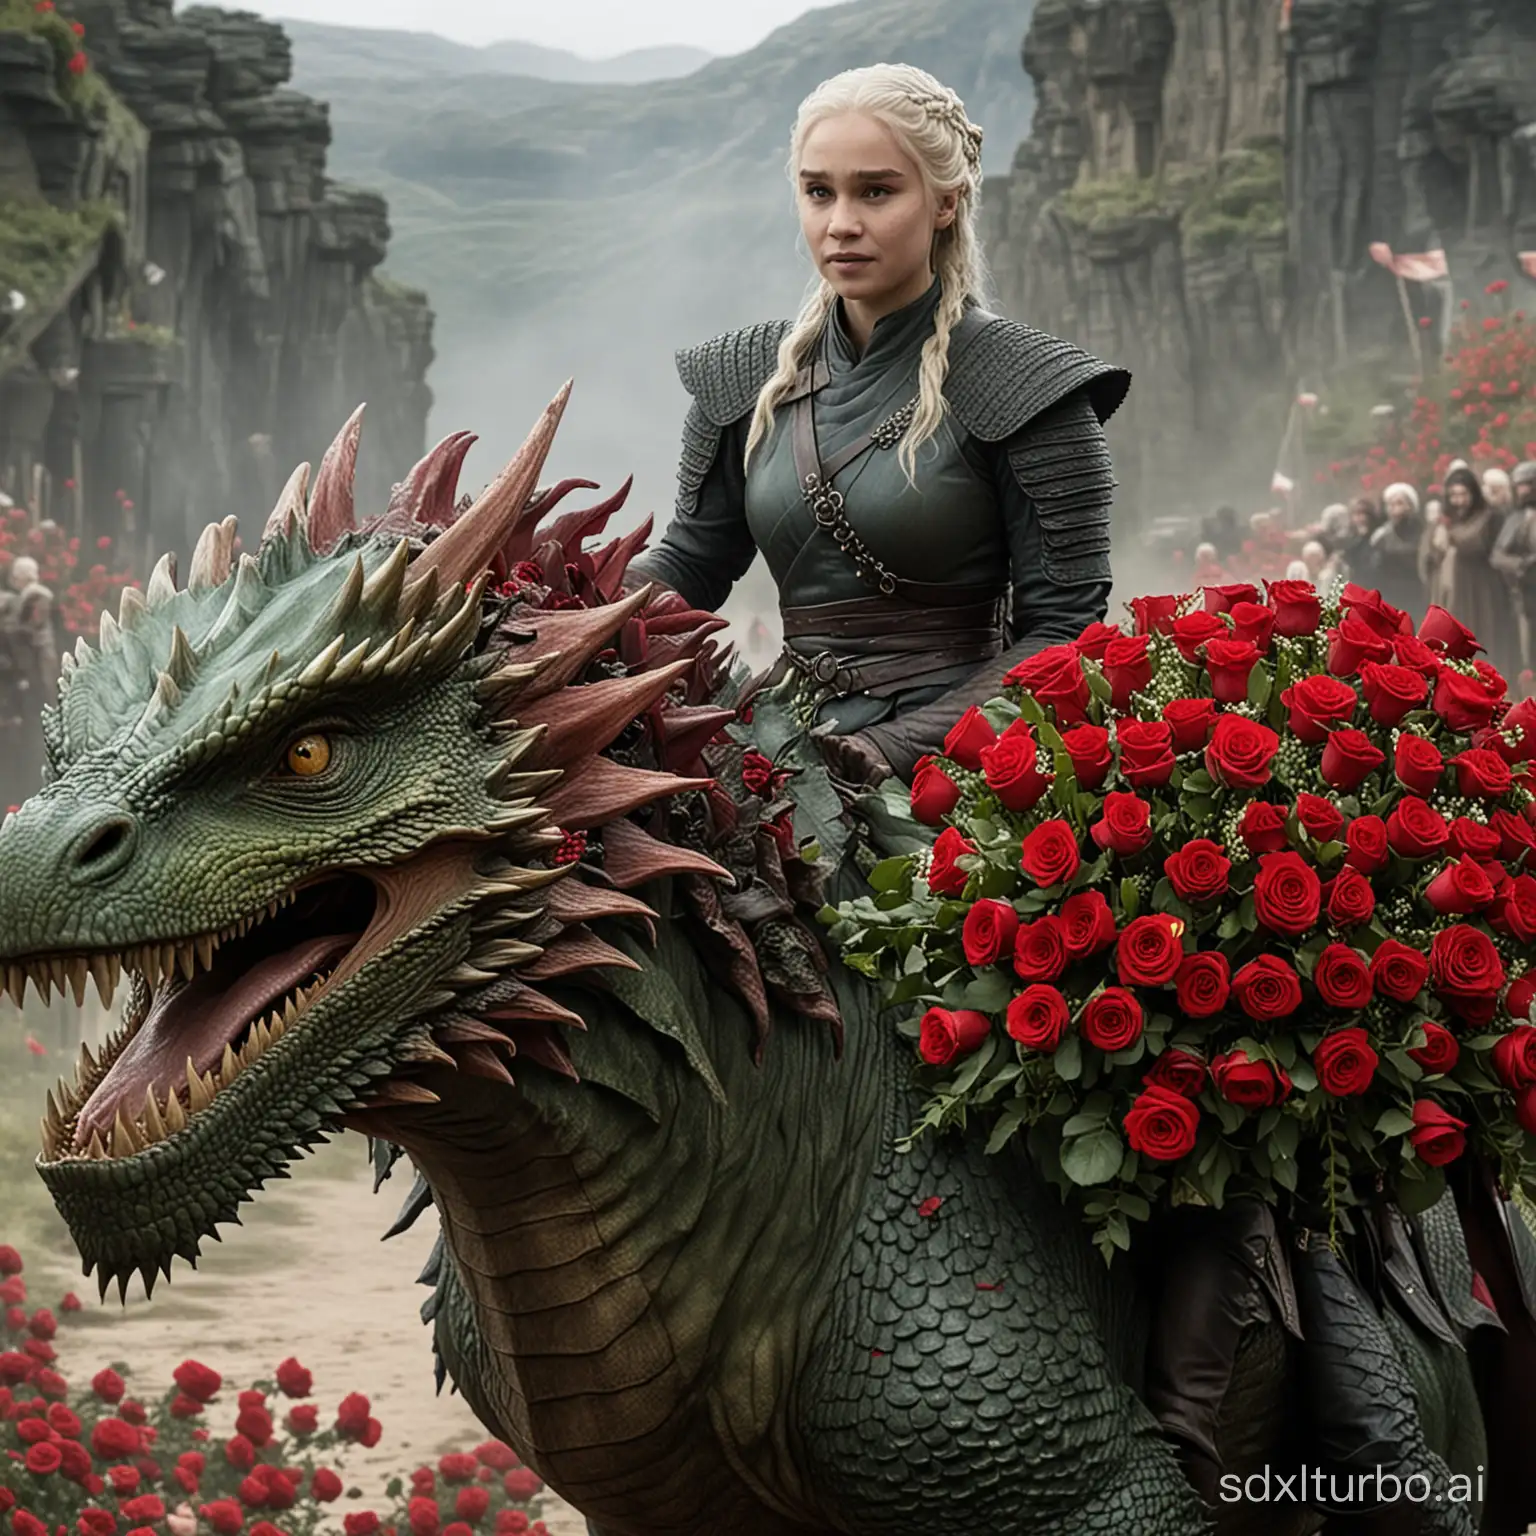 kalessi from game of thrones riding on her green dragon with a large bouquet of red roses in her hands